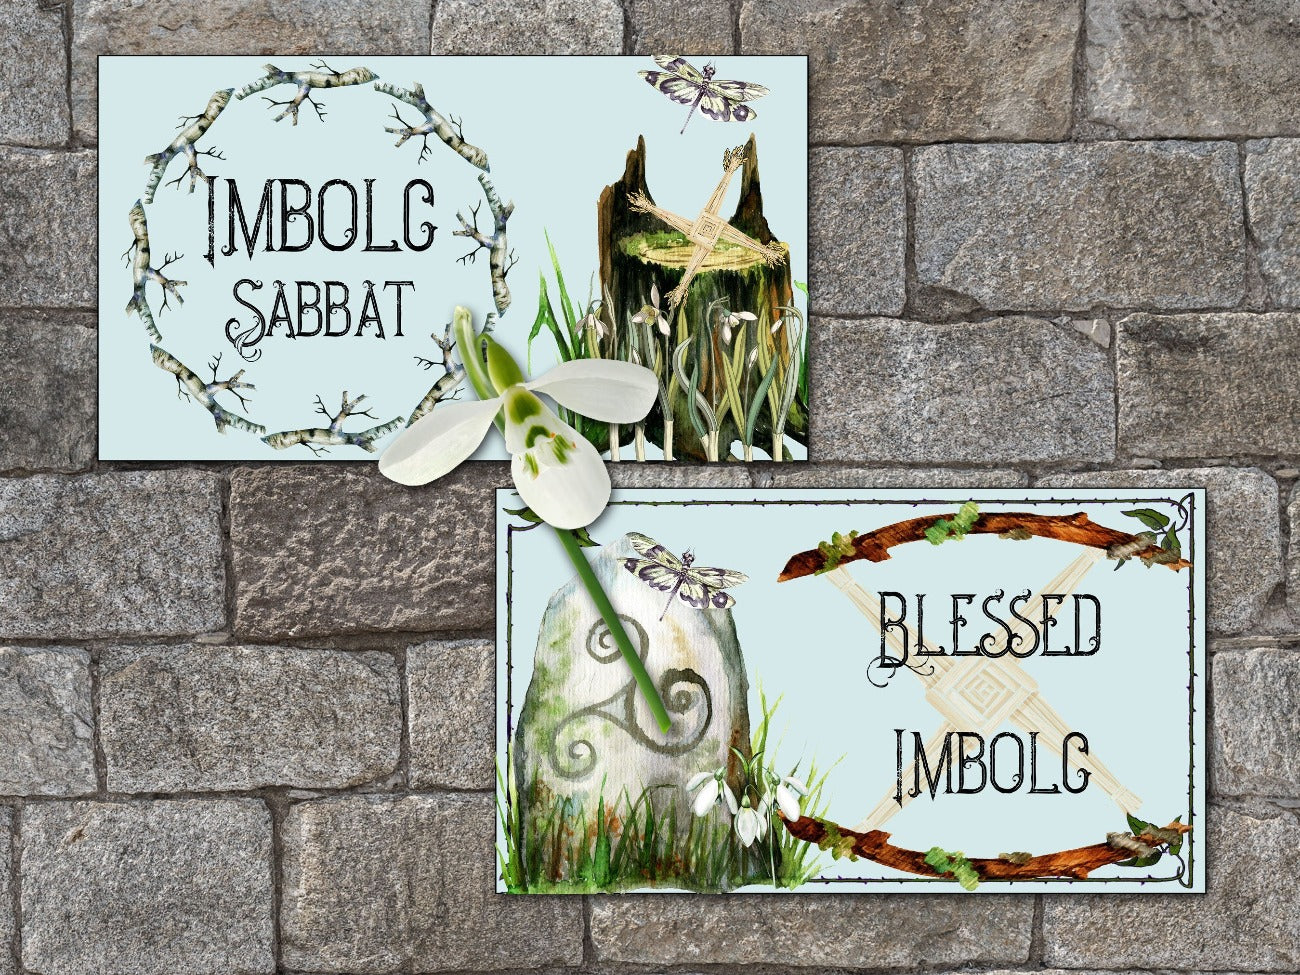 Two IMBOLC LABELS details, pale blue background, birch twig wreath, brigids cross, stump dragonfly and snowdrops, standing stone, blessed imbolc and imbolc sabbat text - Morgana Magick Spell